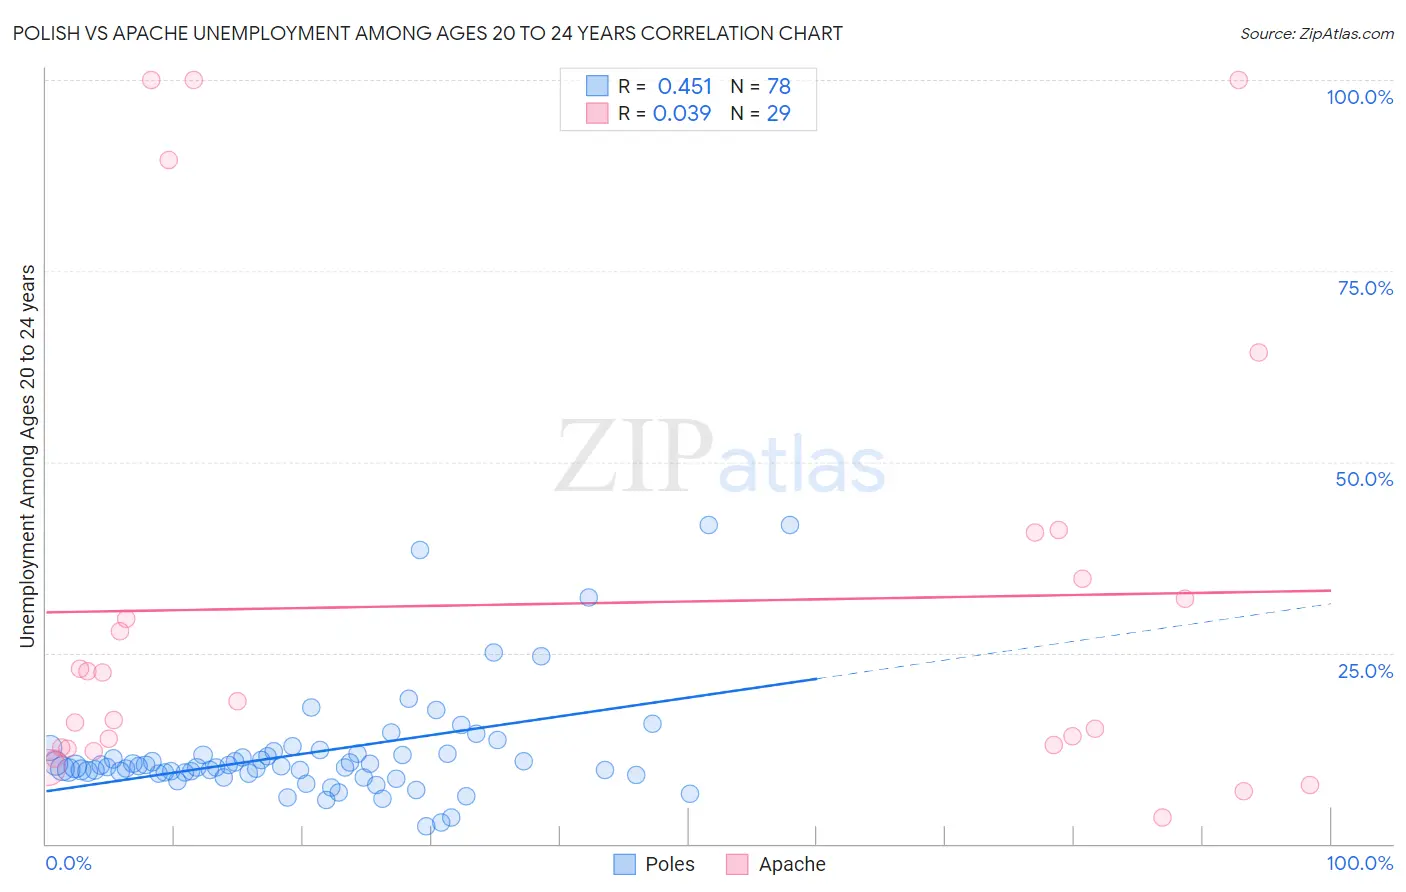 Polish vs Apache Unemployment Among Ages 20 to 24 years